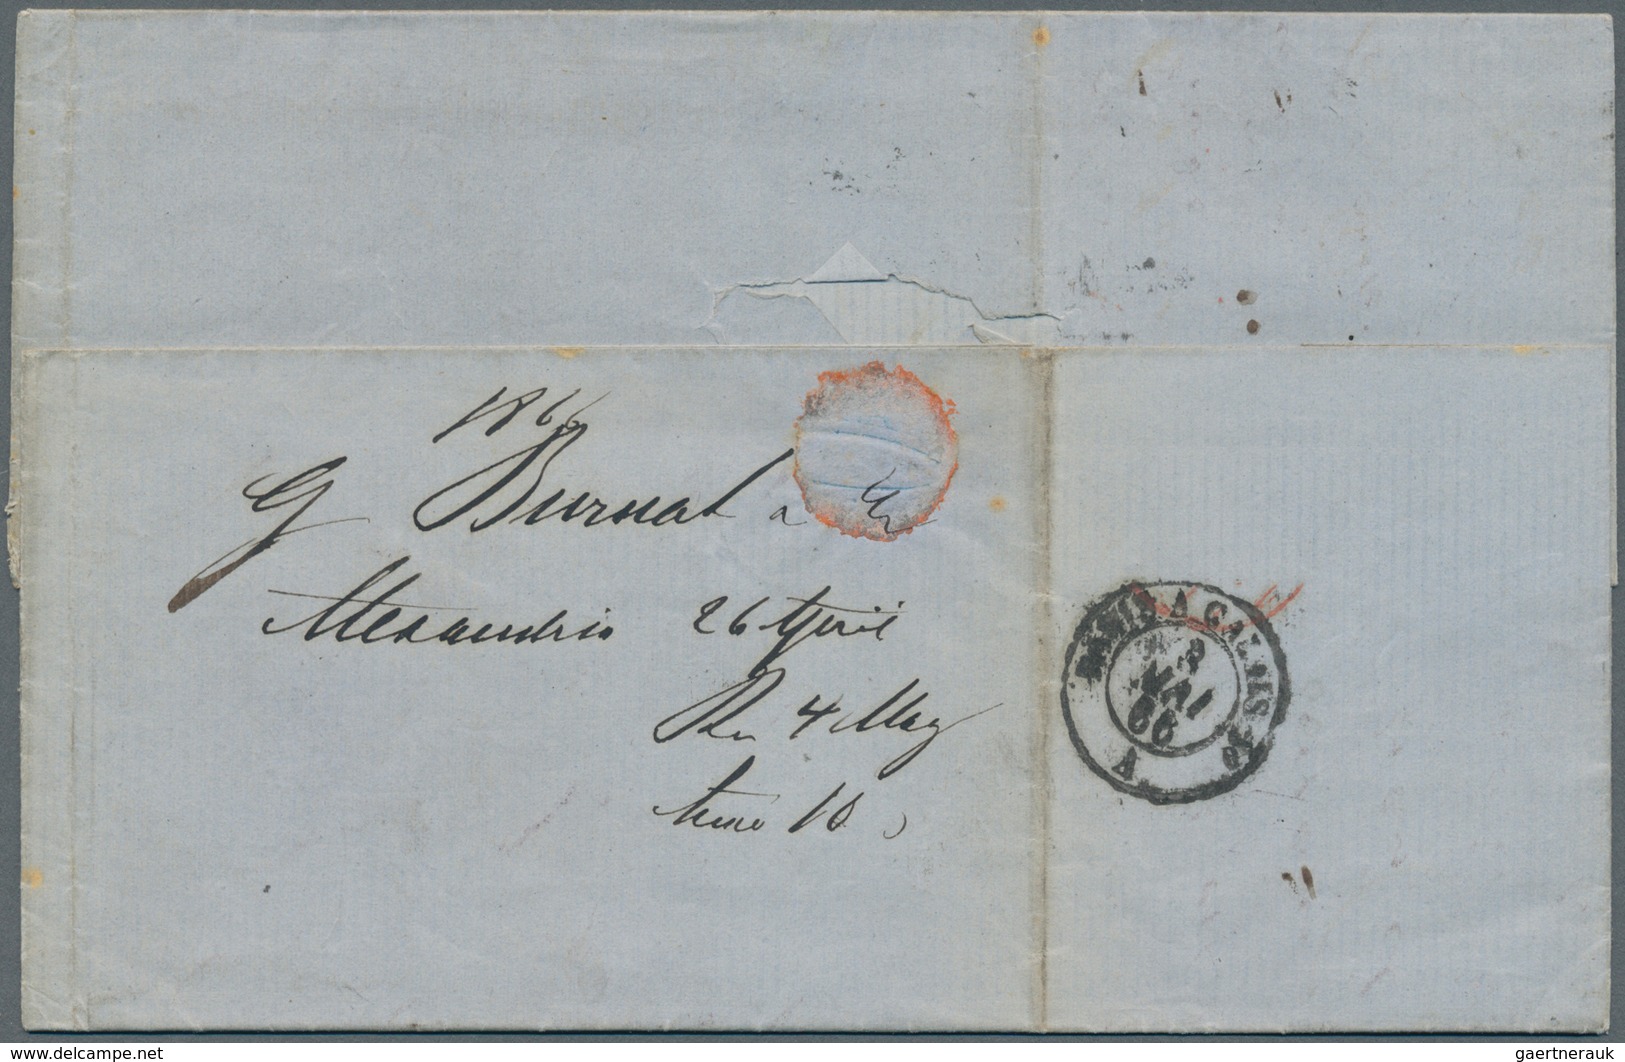 Ägypten: 1866. Folded Entire (vertical Fold Affecting An Adhesive) Written From Alexandria Addressed - 1866-1914 Khedivate Of Egypt